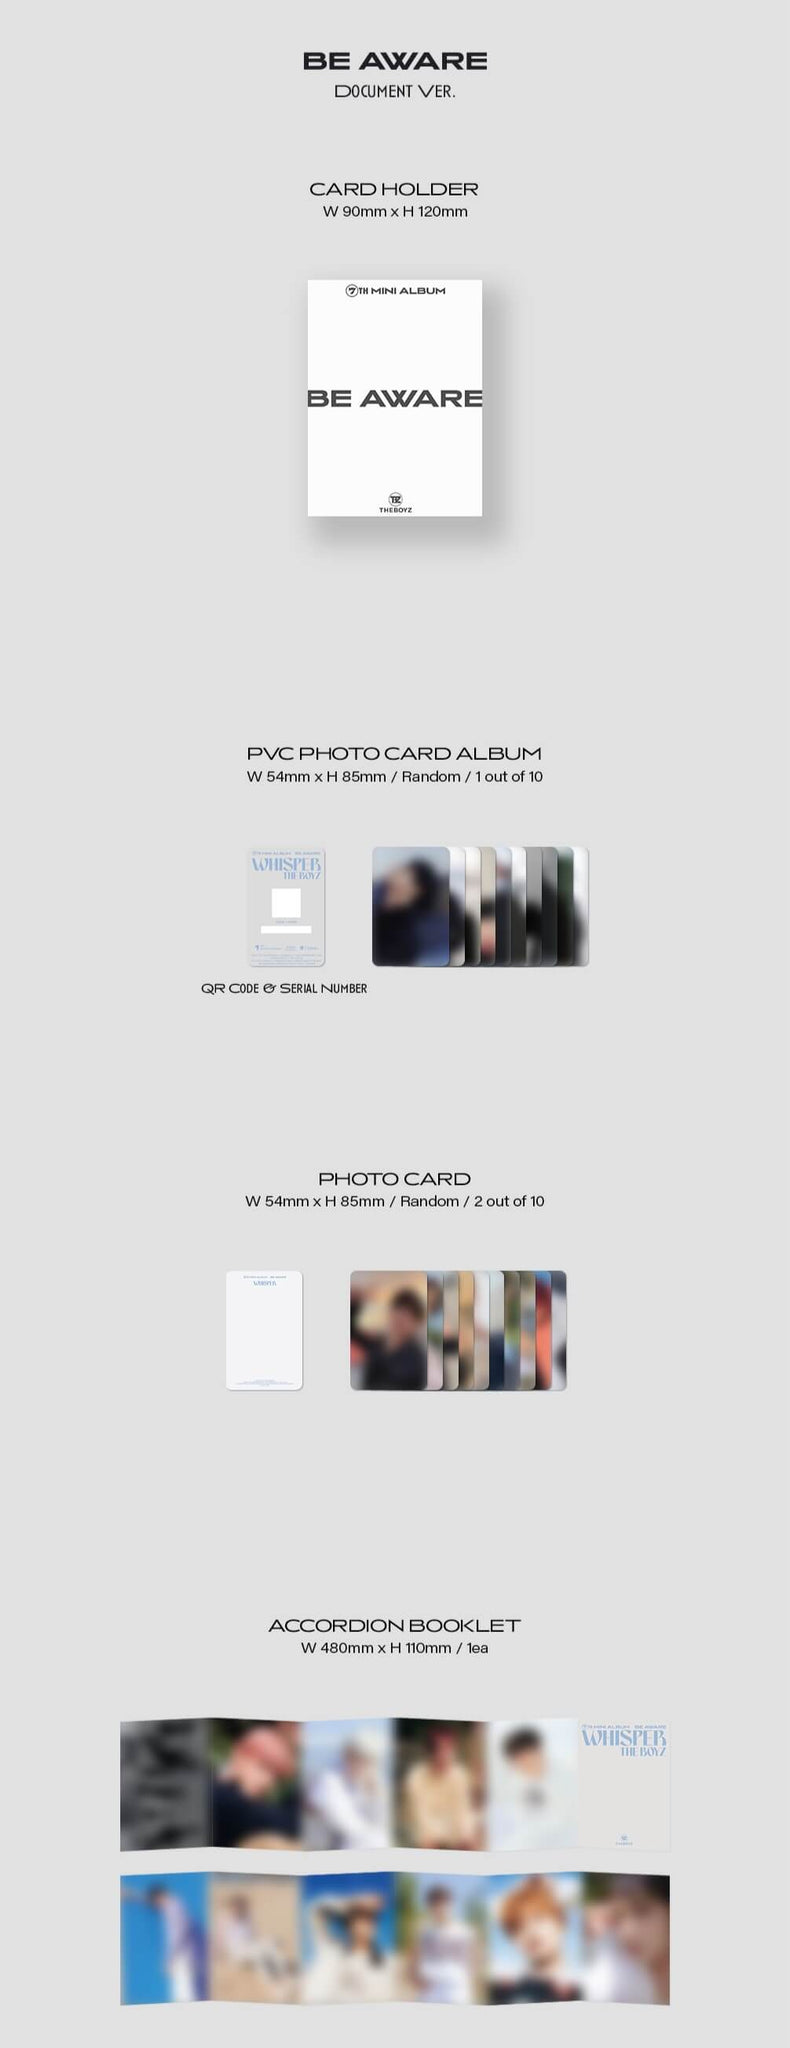 THE BOYZ BE AWARE (Platform Version) - Document Version Inclusions Card Holder PVC Photocard Album Photocards Accordion Booklet